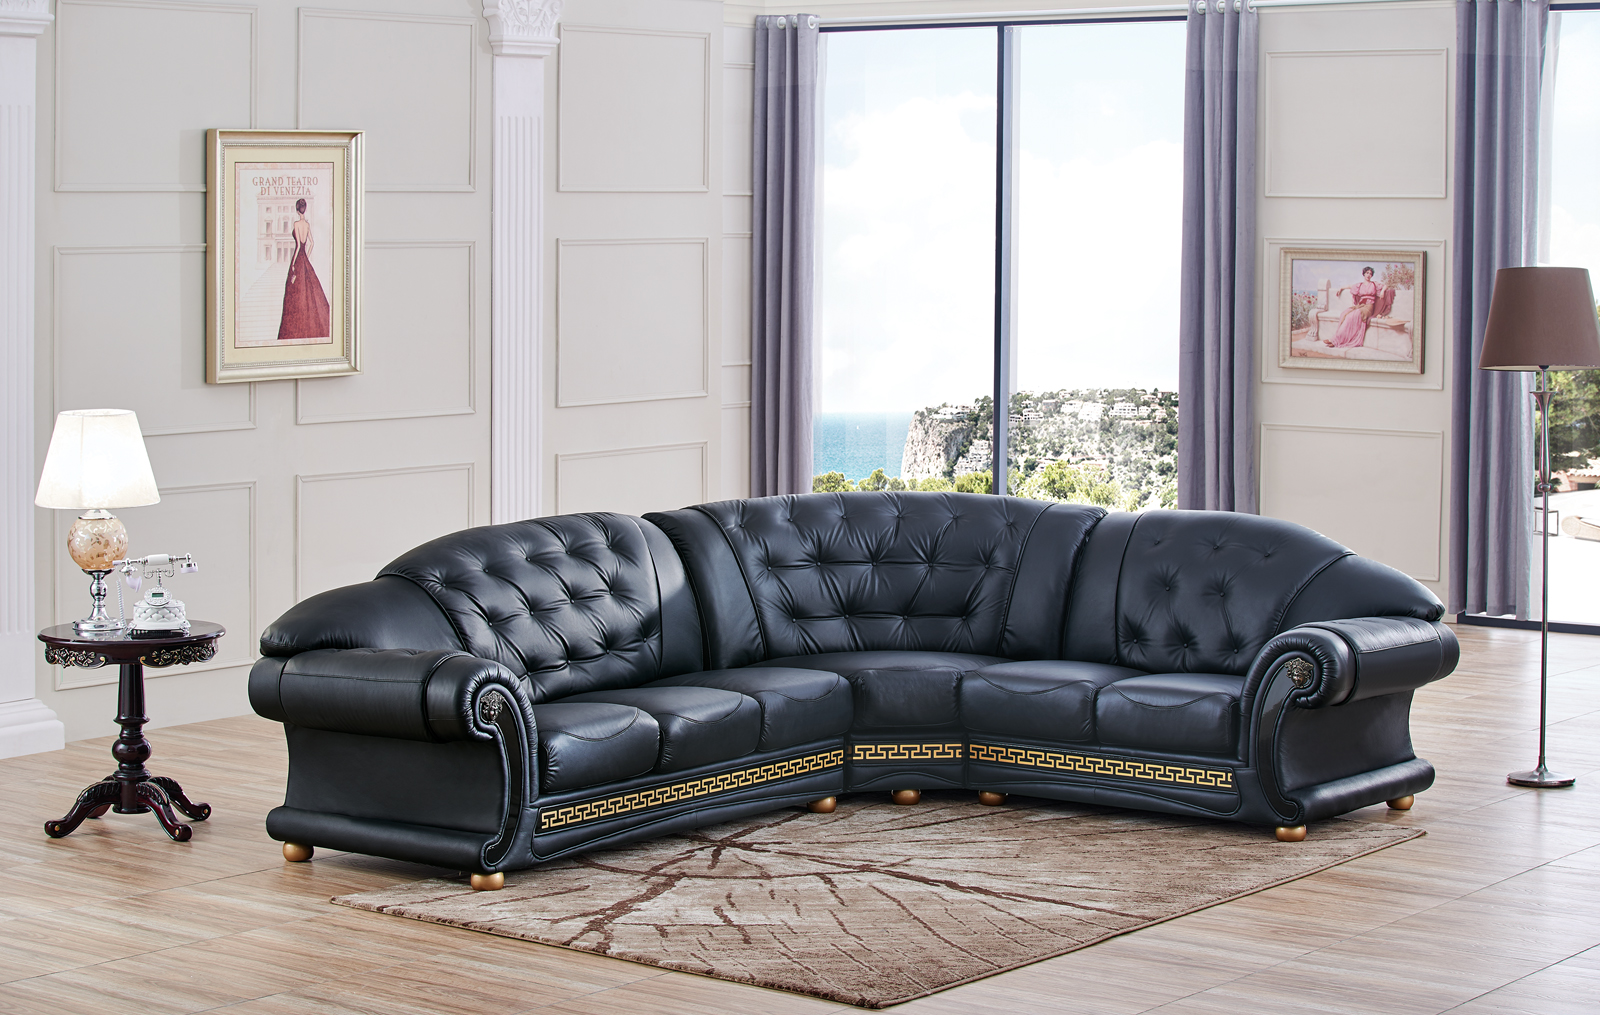 black leather sectional living room